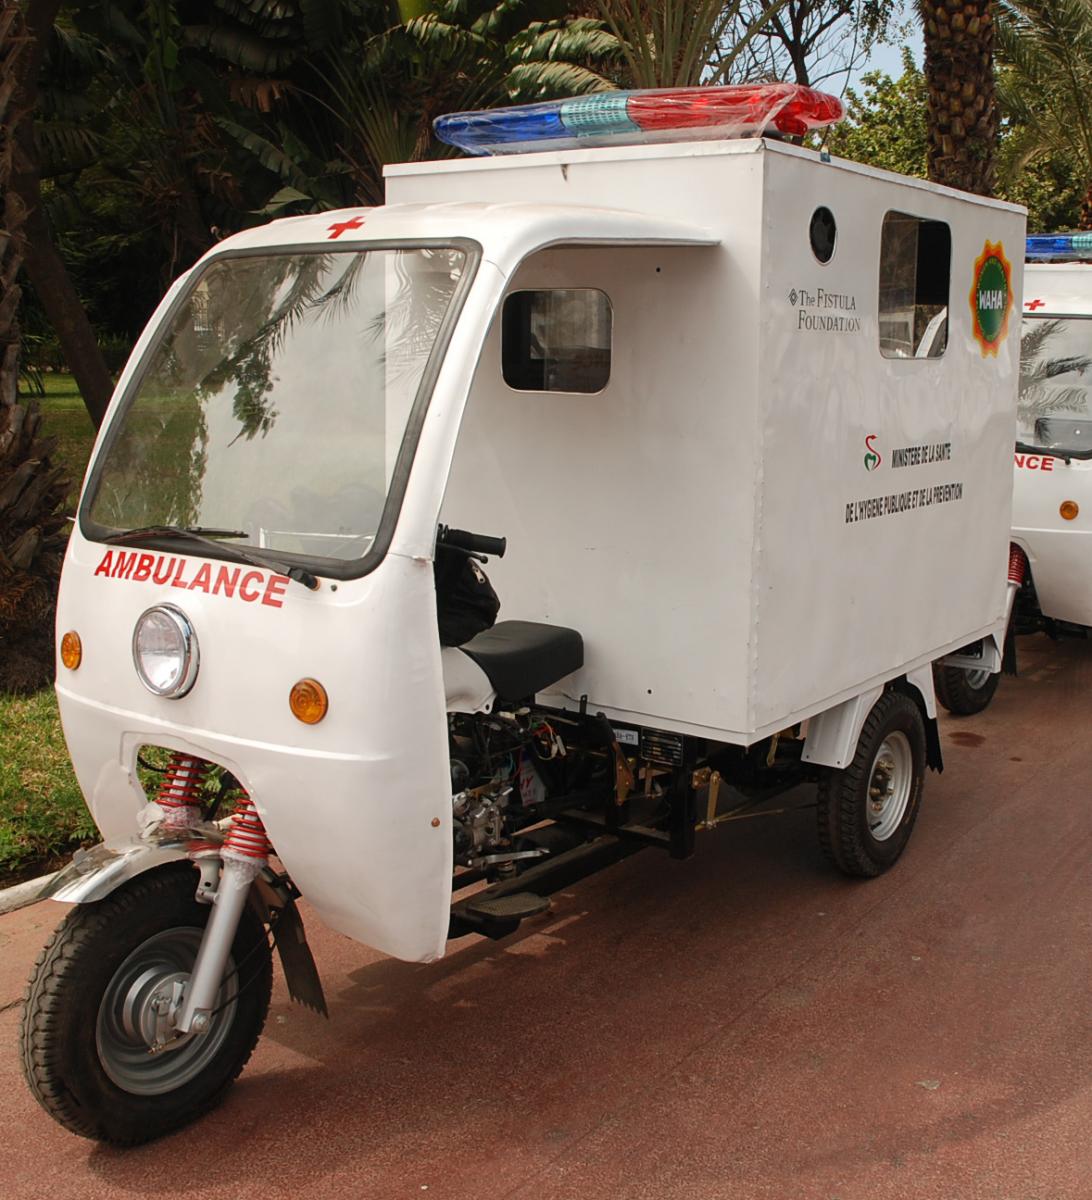 A motorcycle ambulance for maternal health in rural areas